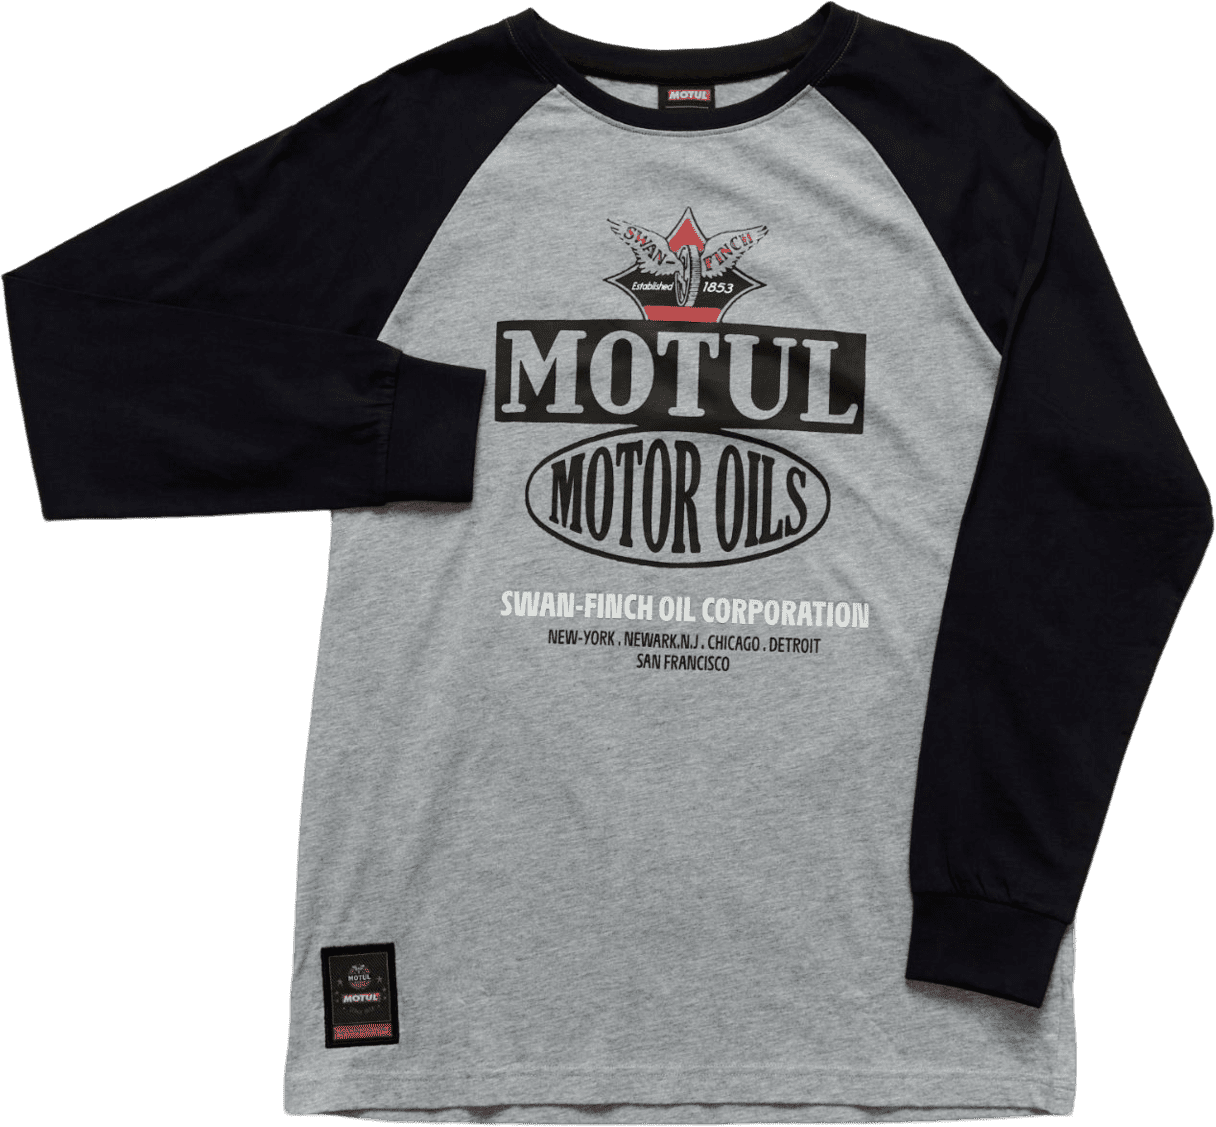 10040095001 Since the 1940's and 1950's, Motul has been involved in motorsport to demonstrate the technical superiority of its products and to develop some of the major innovations which have shaken up the industry.